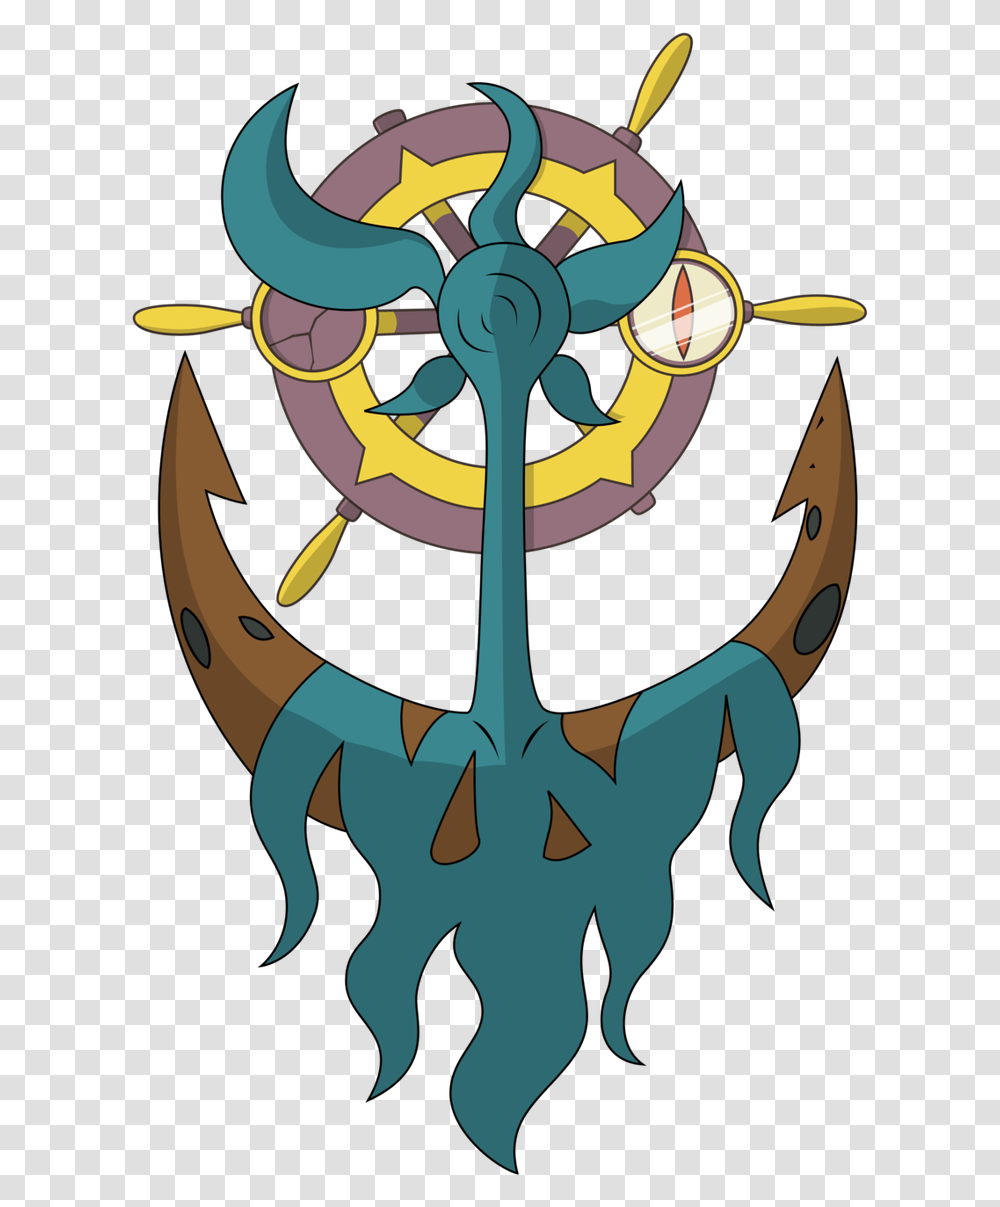 Chain Like Green Seaweed Can Stretch Outwards Shiny Delmise Art, Hook, Anchor, Symbol, Claw Transparent Png